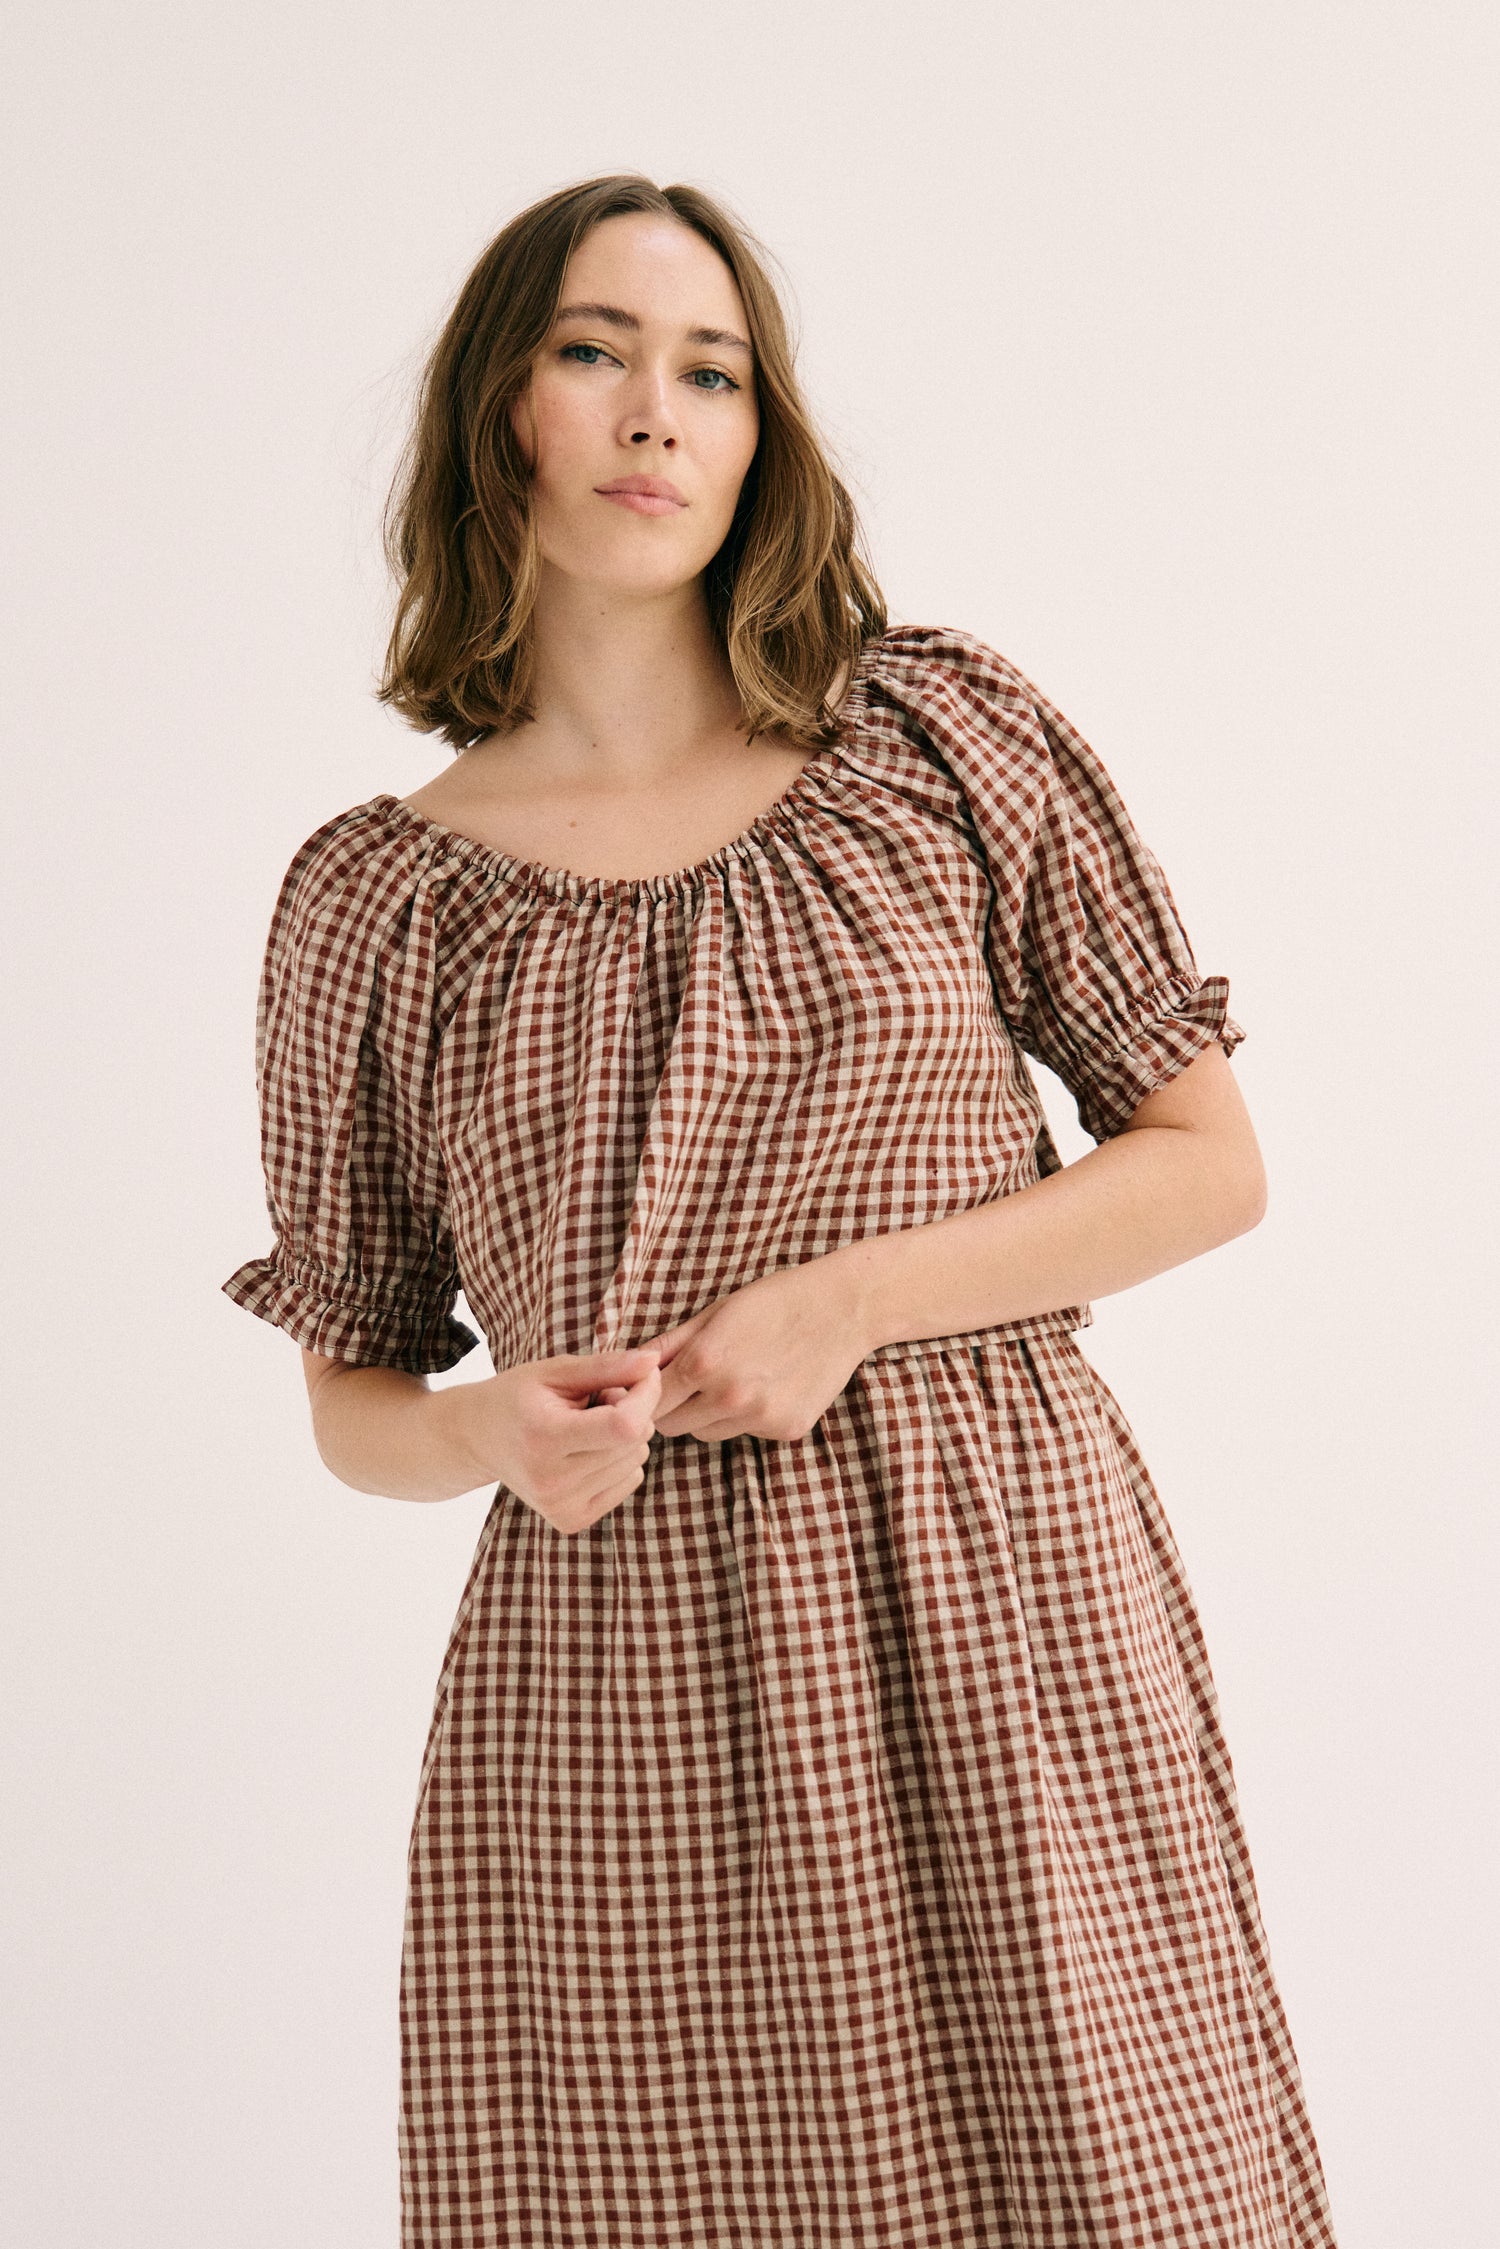 Clementine Blouse - Brown Gingham